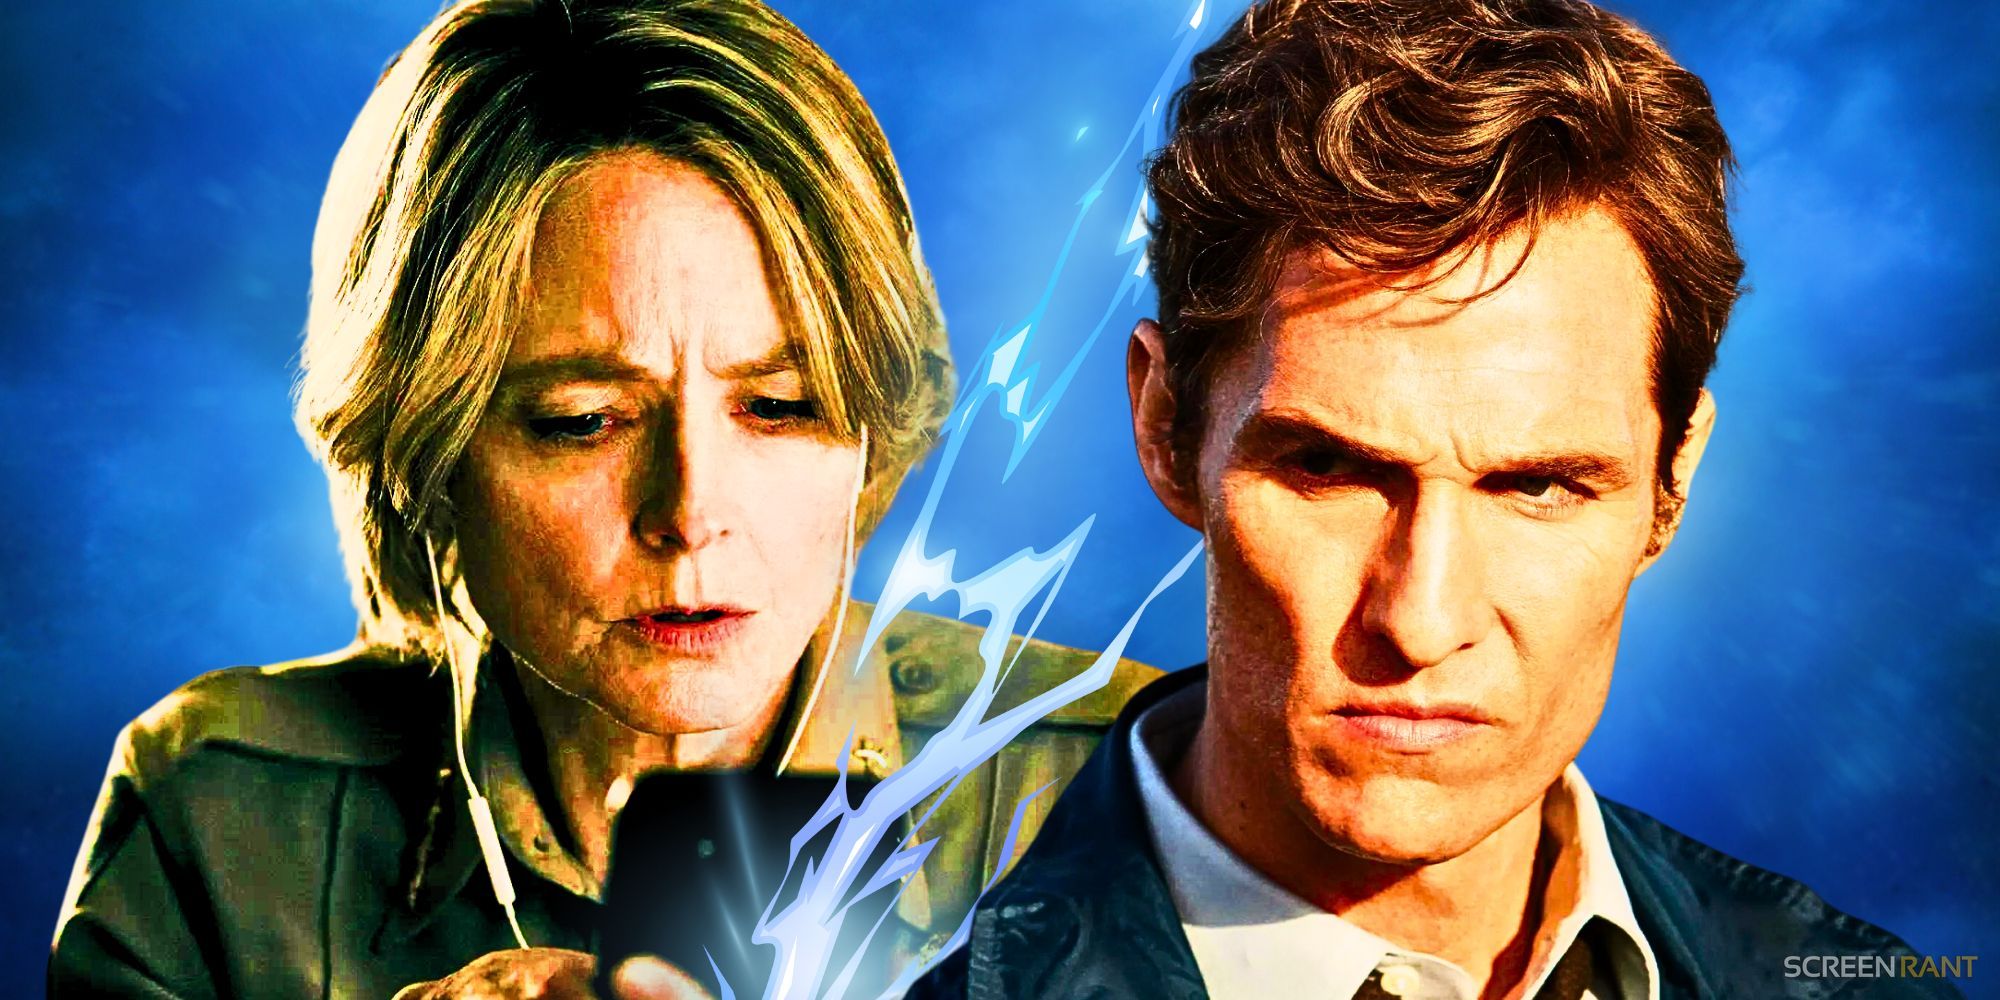 Jodie Foster as Liz Danvers looking at a phone in True Detective Night Country, and Matthew McConaughey as Rust Cohle with shorter hair wearing a blue jacket in True Detective season 1, with a blue background